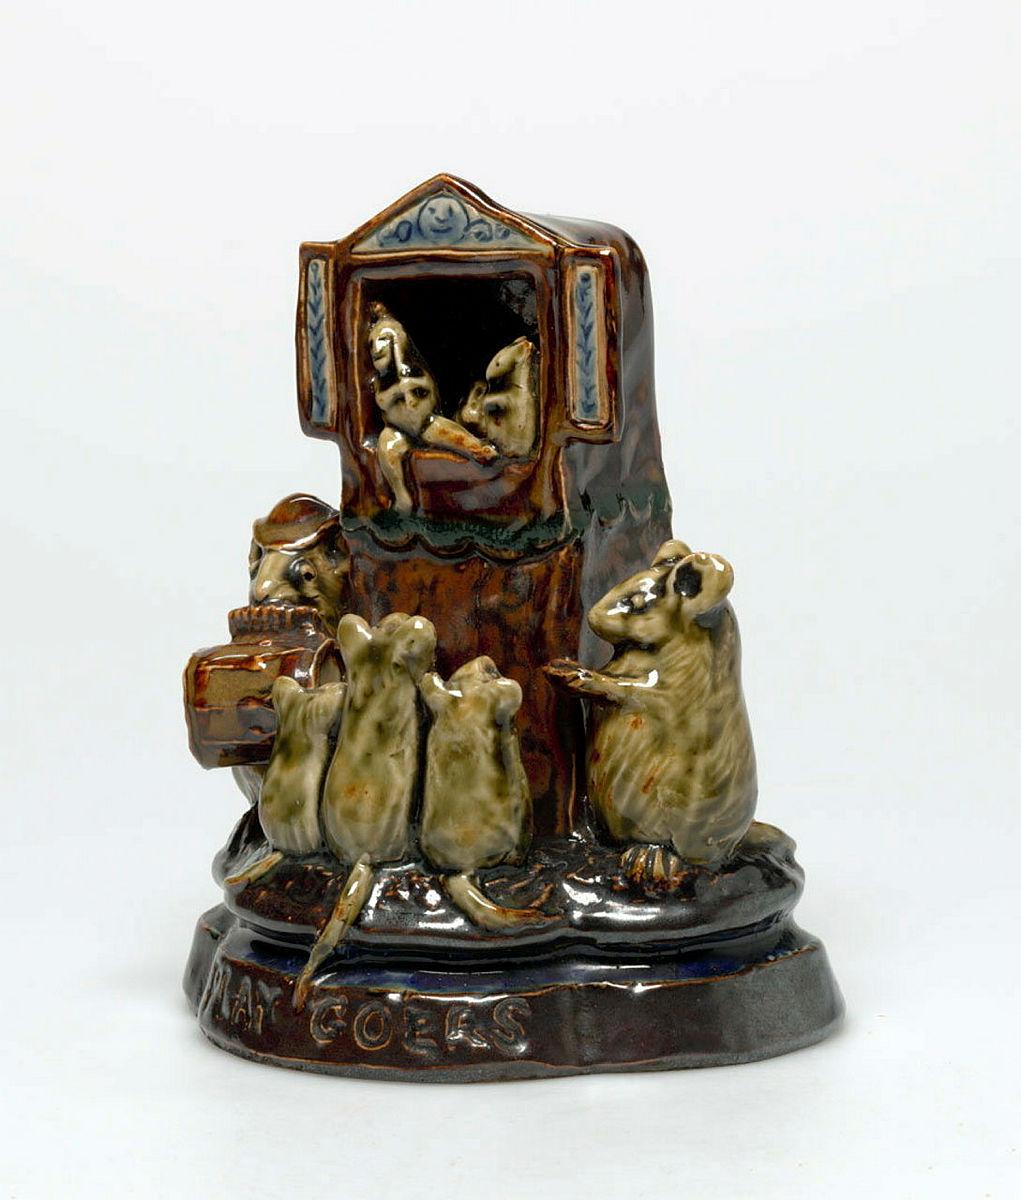 Artwork Ornament:  Playgoers this artwork made of Stoneware, modelled as a group of three mice watching a Punch and Judy show and flanked by a musician and coin collector.  Salt glazed, created in 1884-01-01